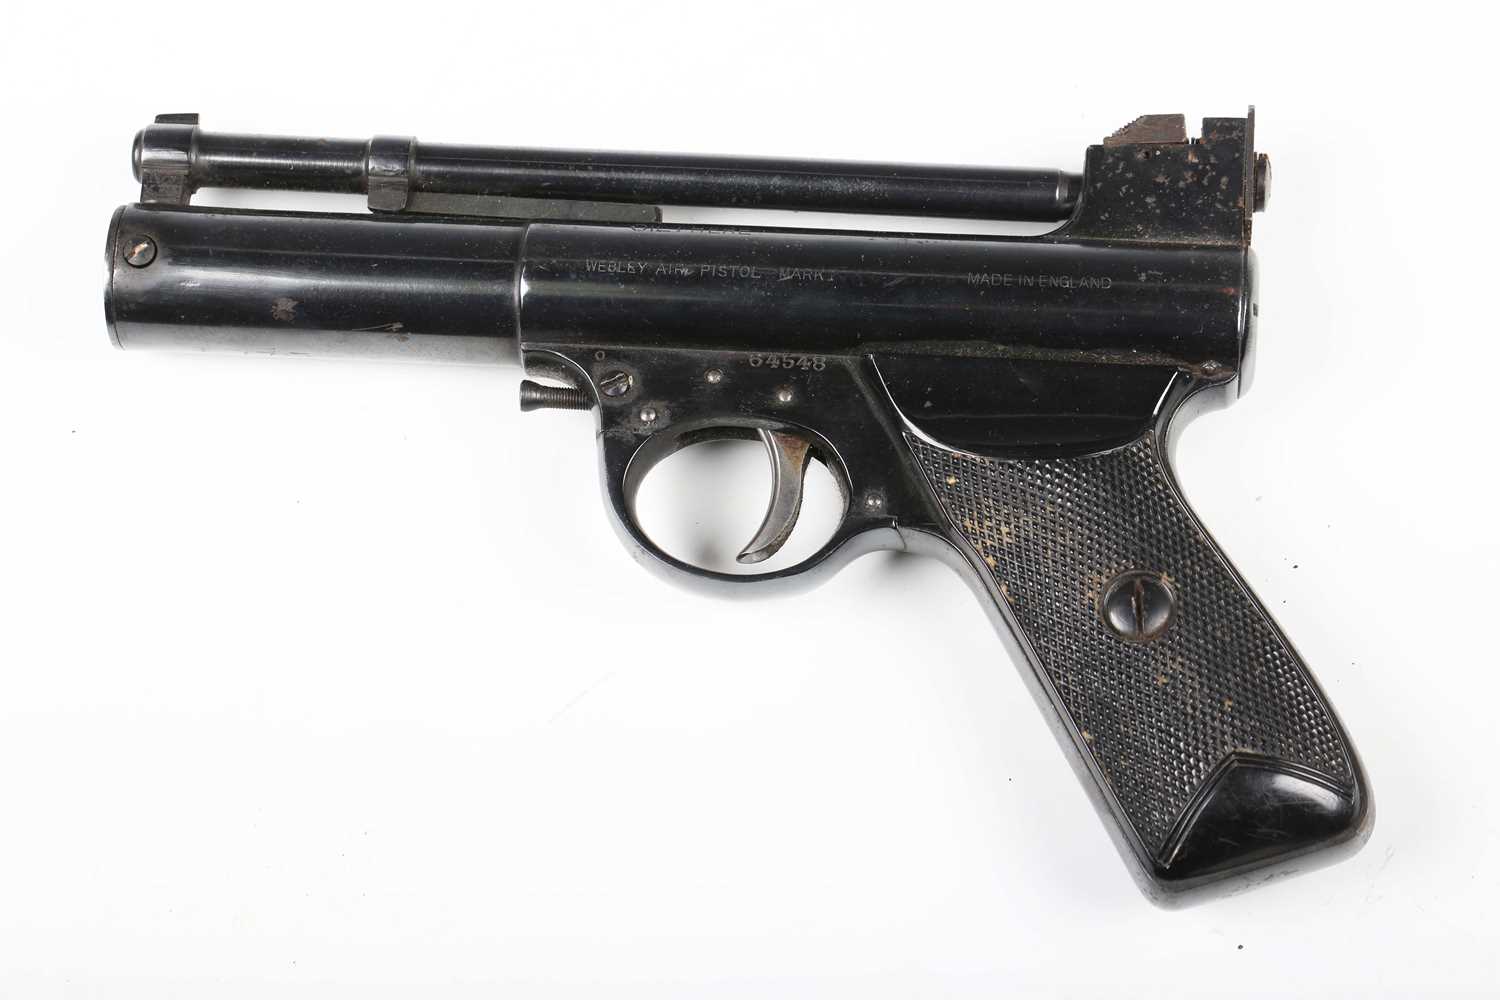 A Webley Mark I .177 air pistol, number '64548', with composite plastic plate grips.